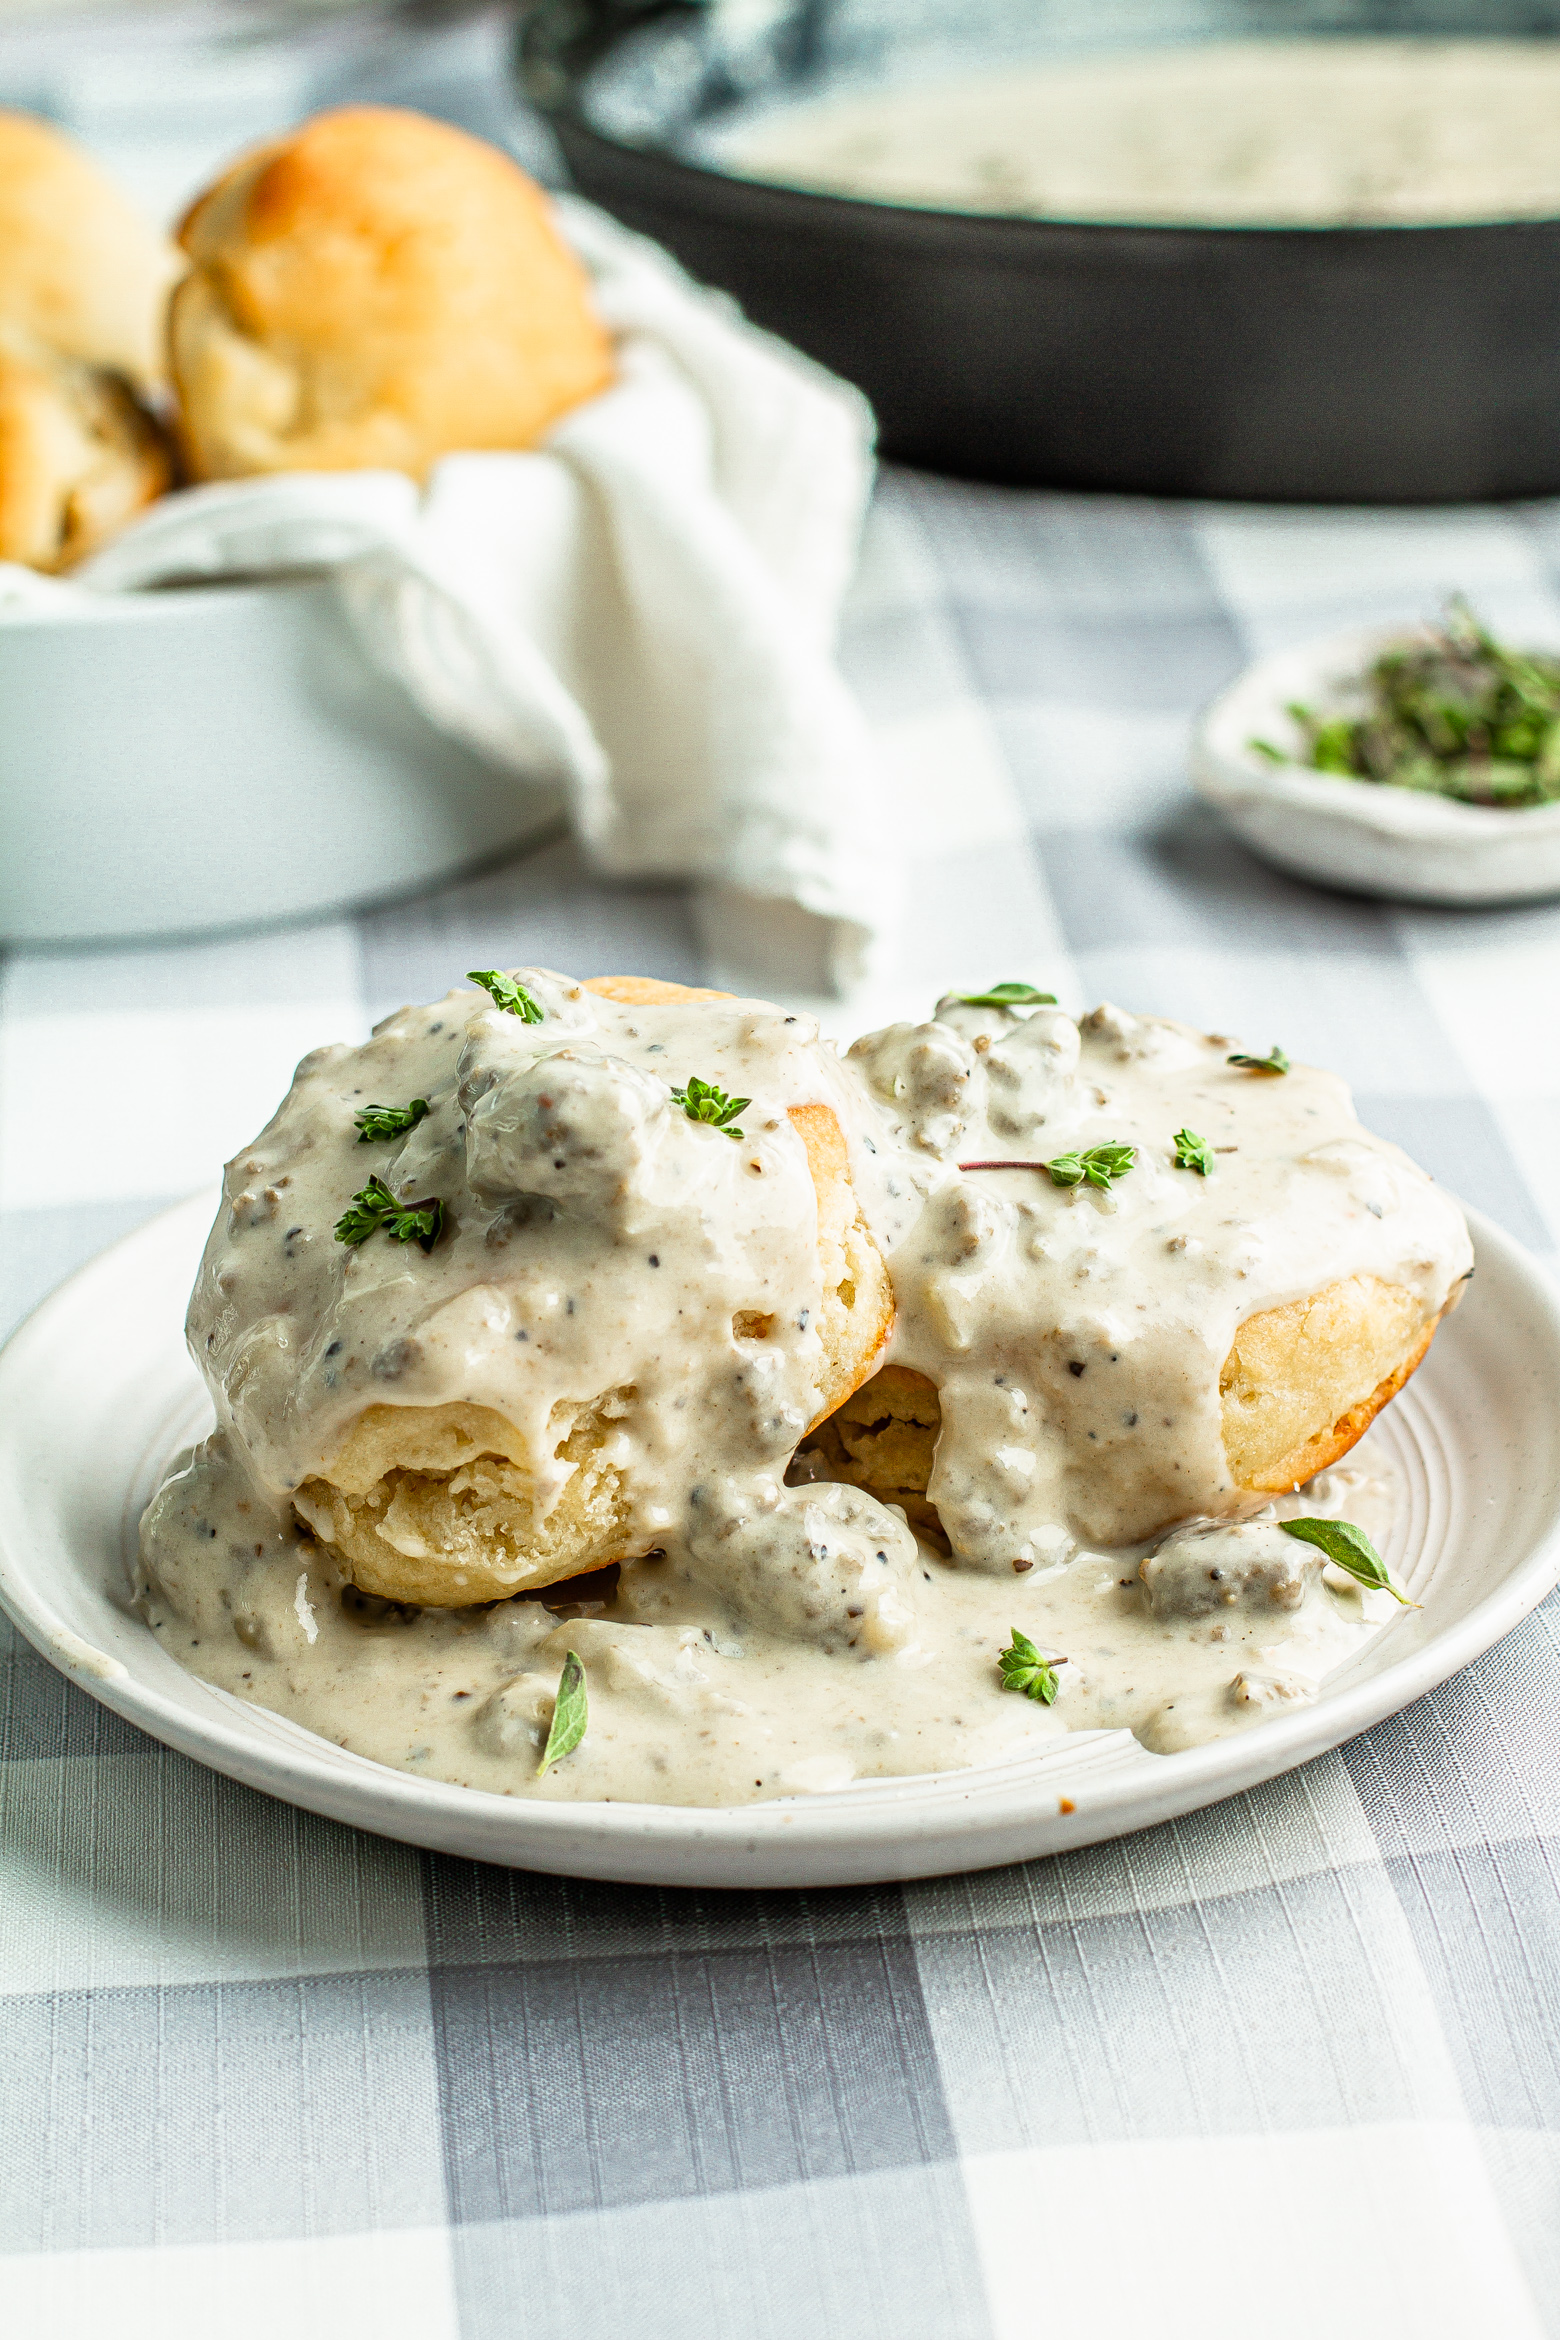 Biscuits & Gravy with Turkey Sausage Recipe | Meiko and The Dish